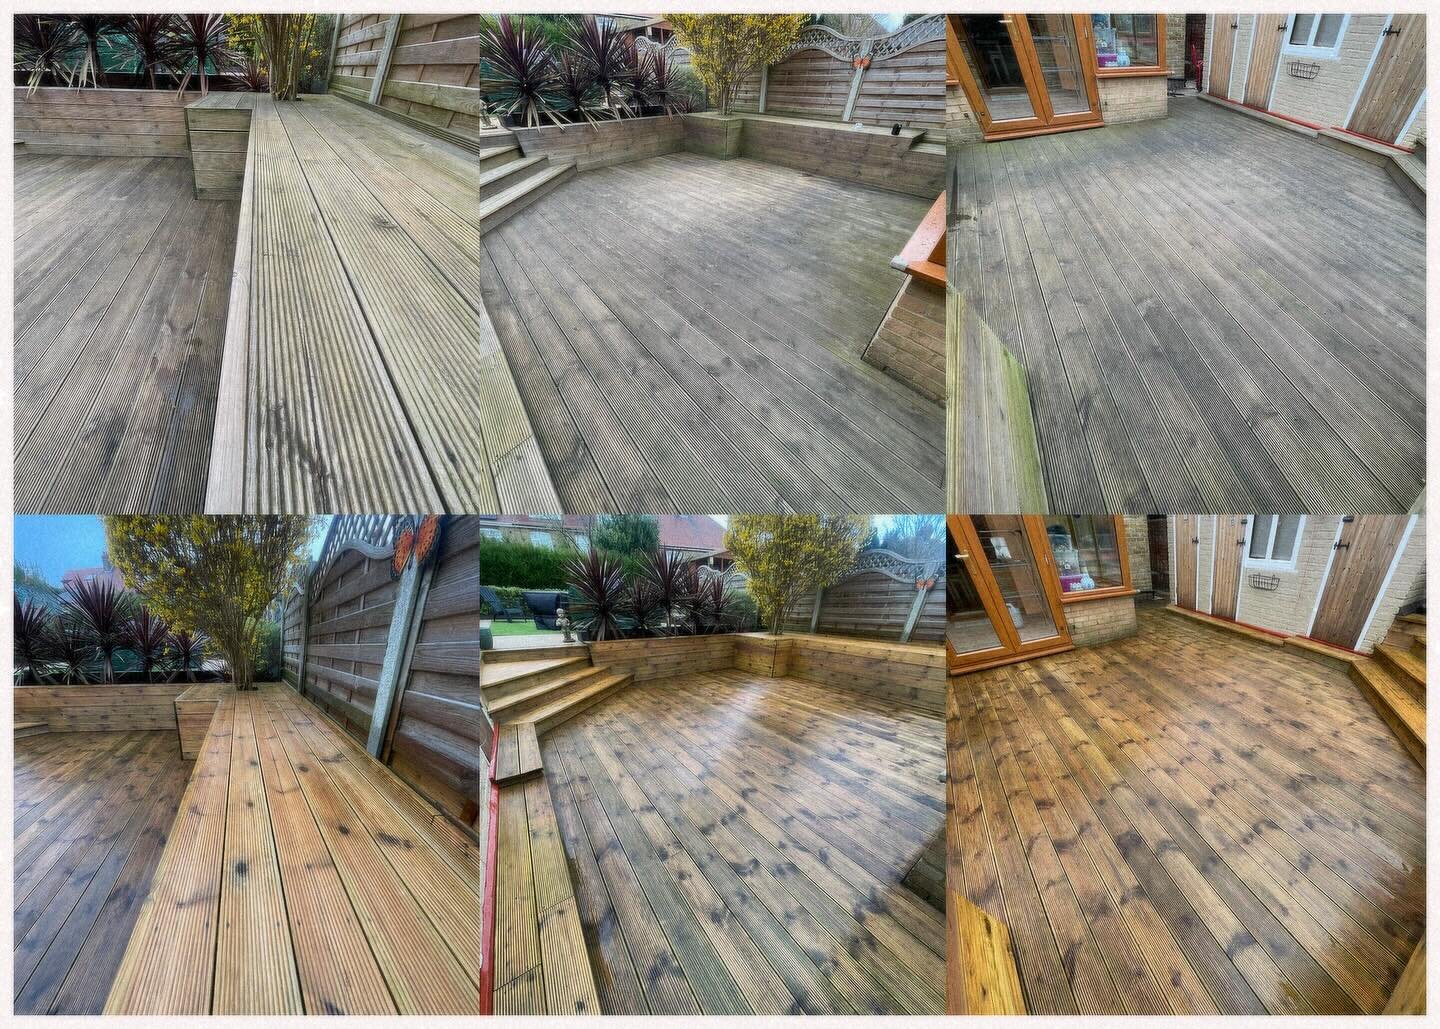 From boring and dingy, to light and bright! What a transformation on this decking 😍 #leafitout #pressurewashing #decking #ukbusiness #fyp